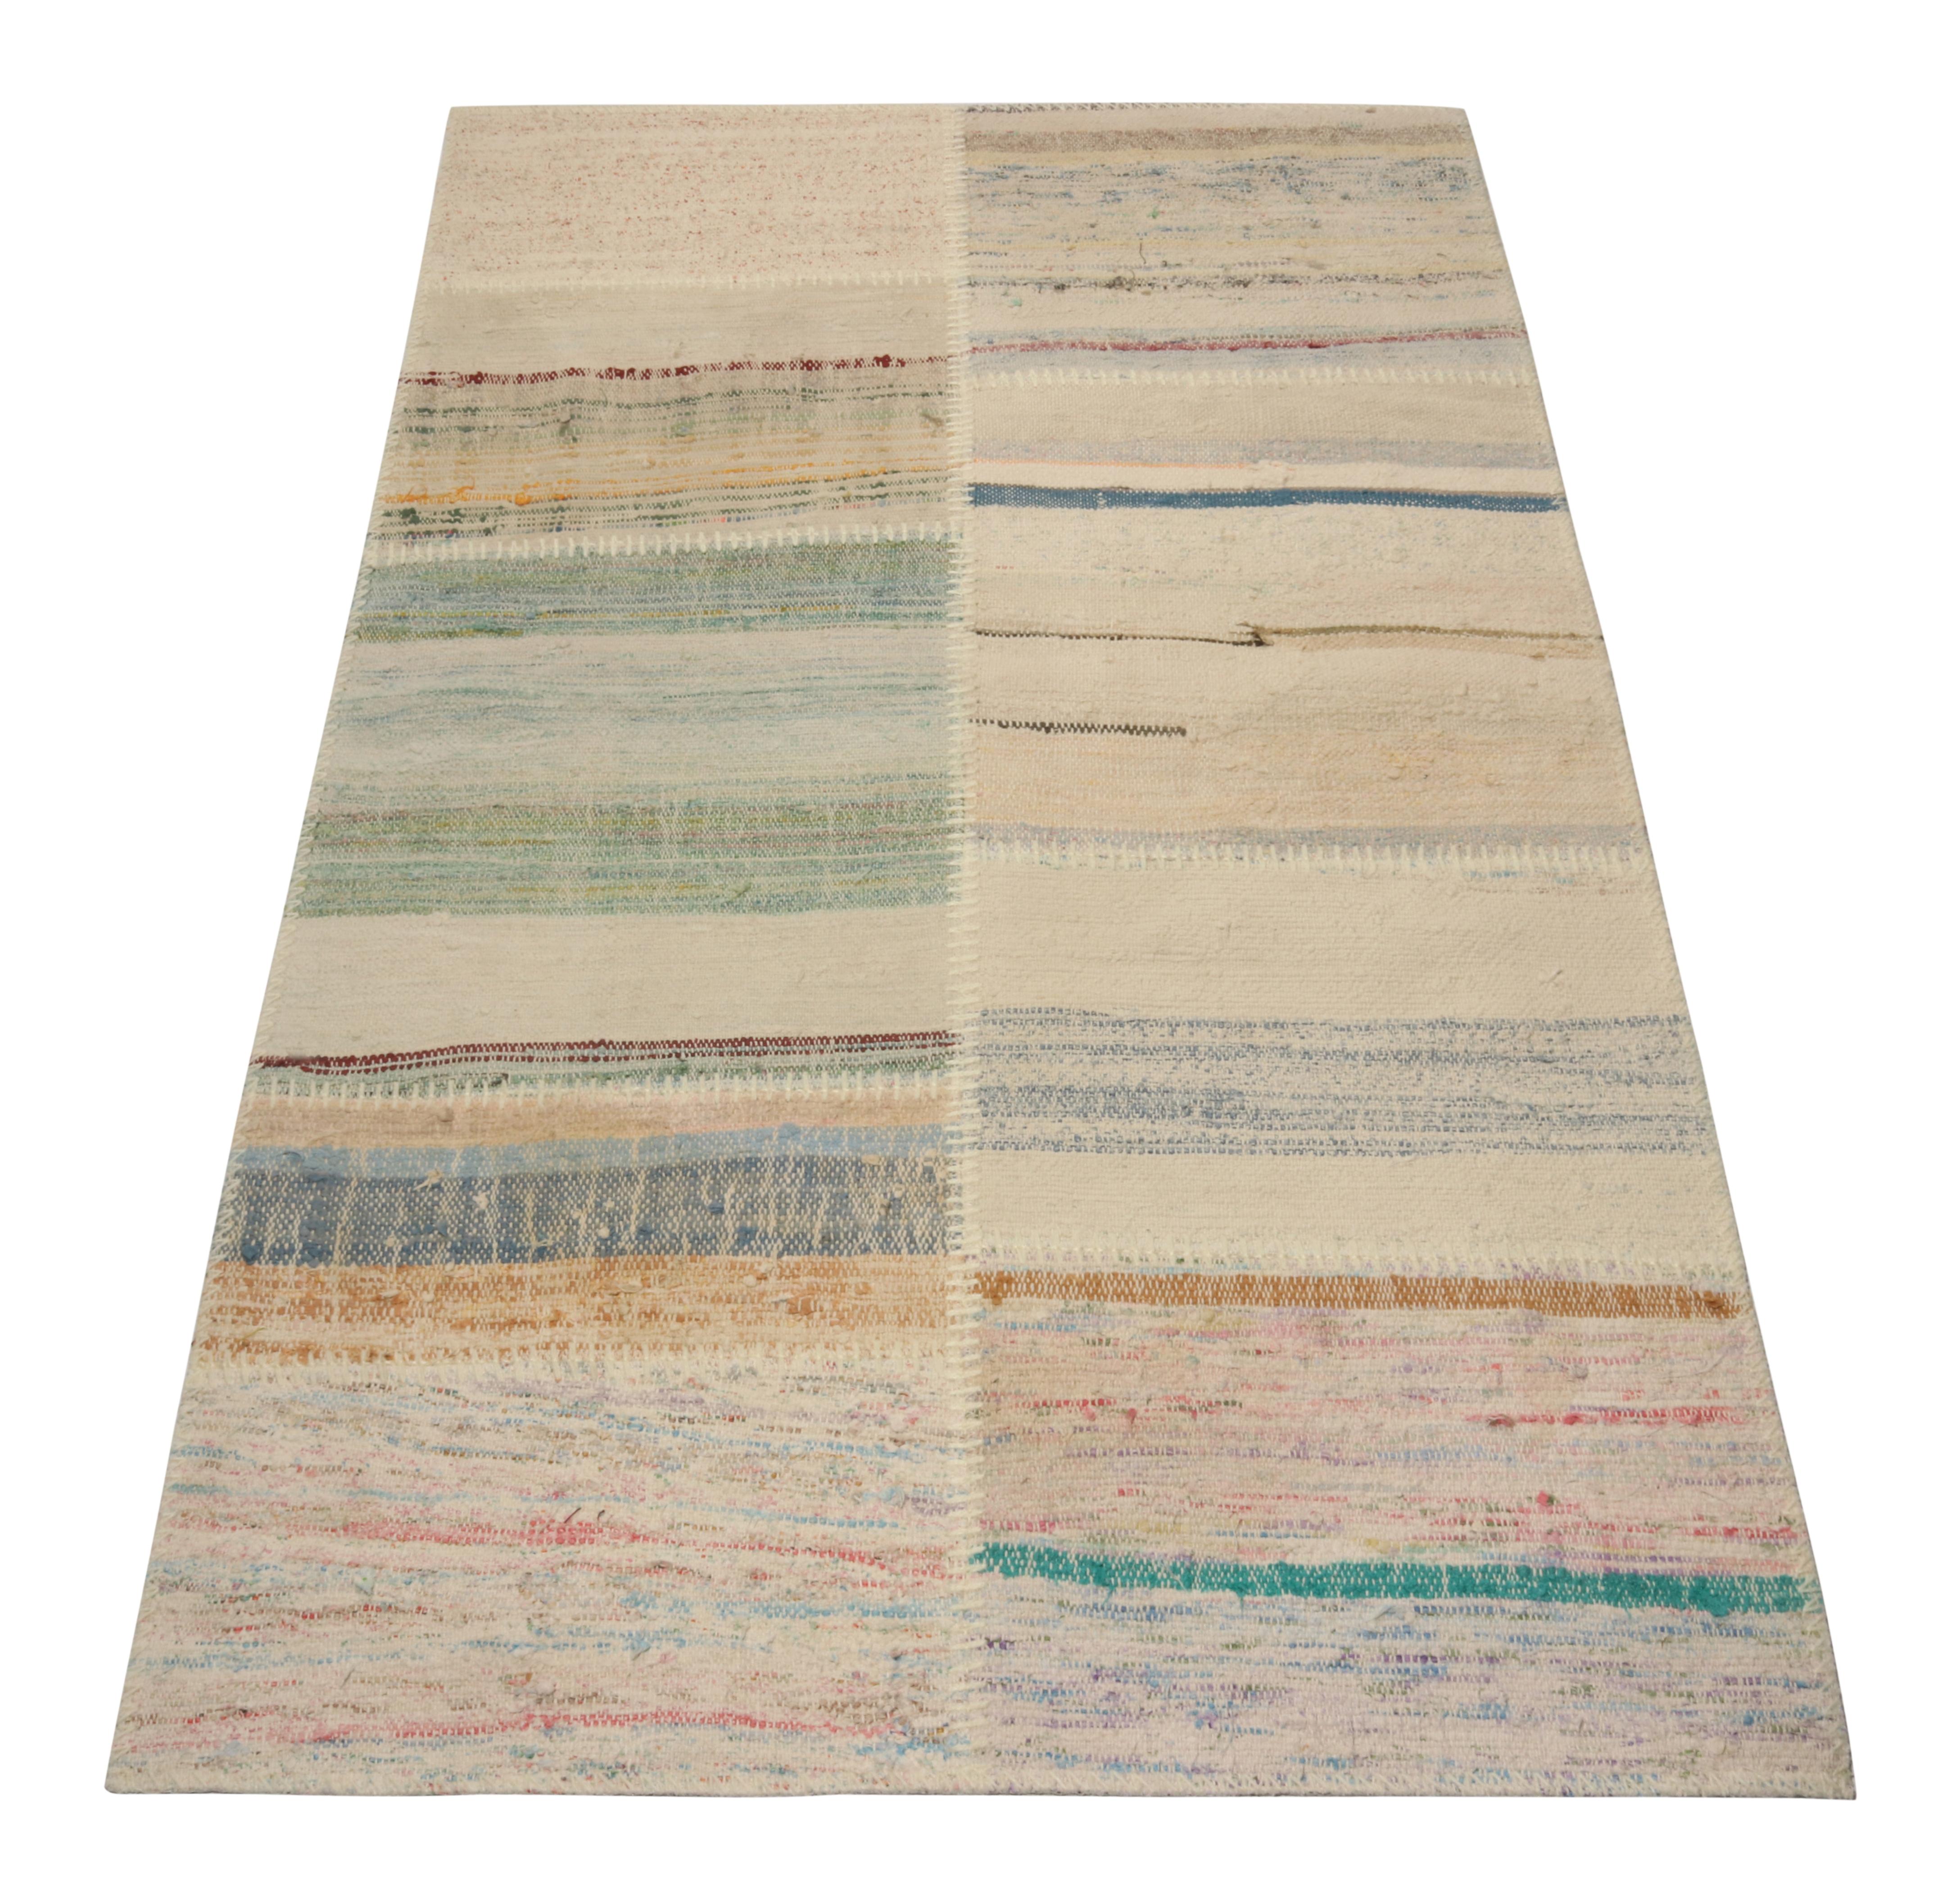 Handwoven in wool, Rug & Kilim presents a 3x5 rug from their innovative new patchwork kilim collection. 

On the Design: 

This flat weave technique repurposes vintage yarns in polychromatic stripes and striae, achieving a playful look with